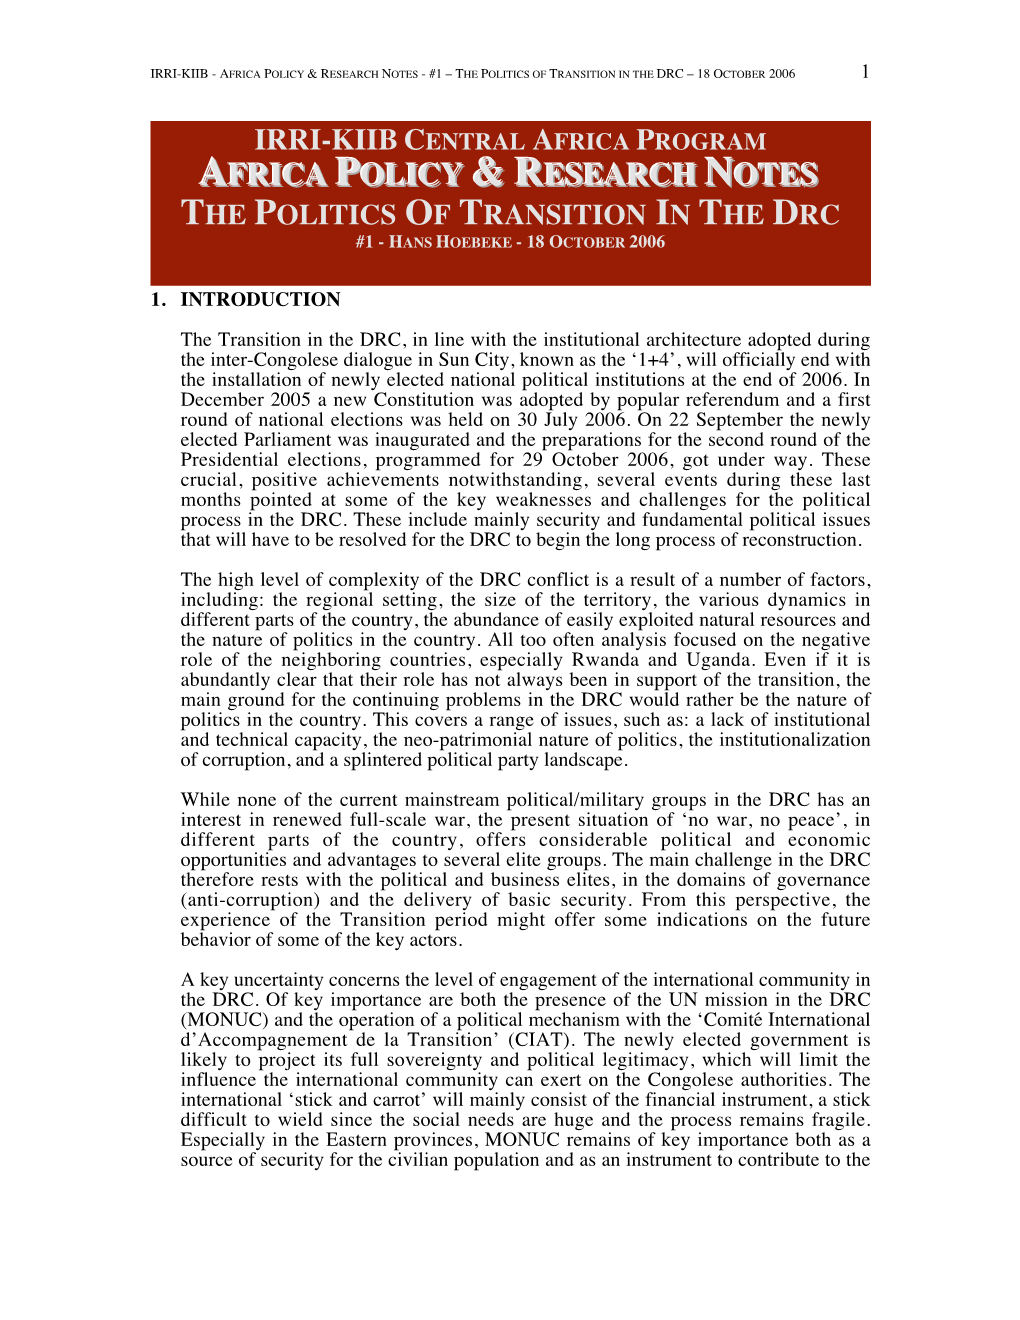 Africa Policy & Research Notes